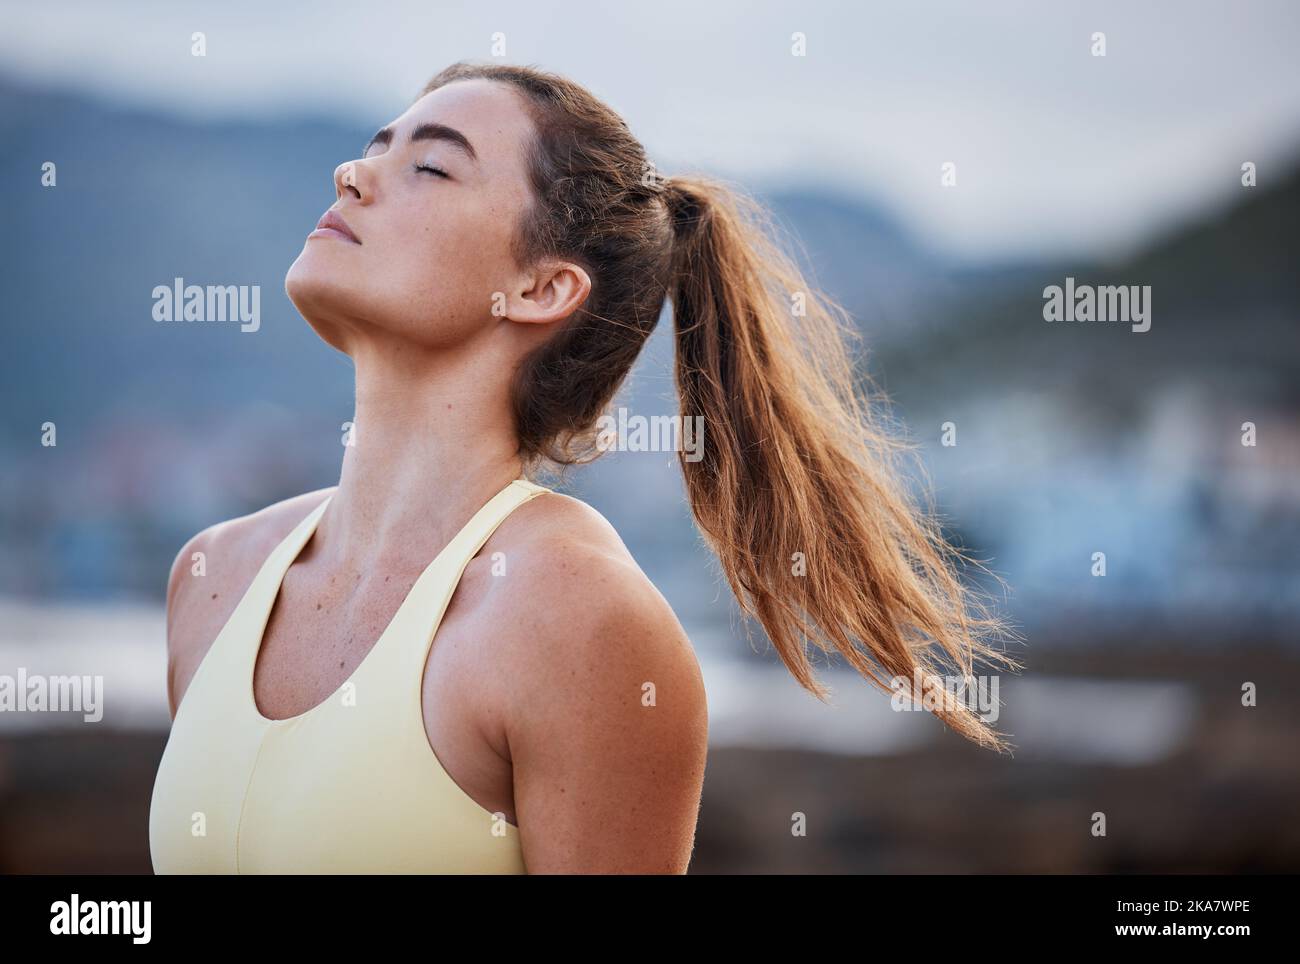 Woman meditation, breathing and spiritual wellness and freedom after city workout. Calm breathe of fresh air, natural outdoor free, faith and relax Stock Photo